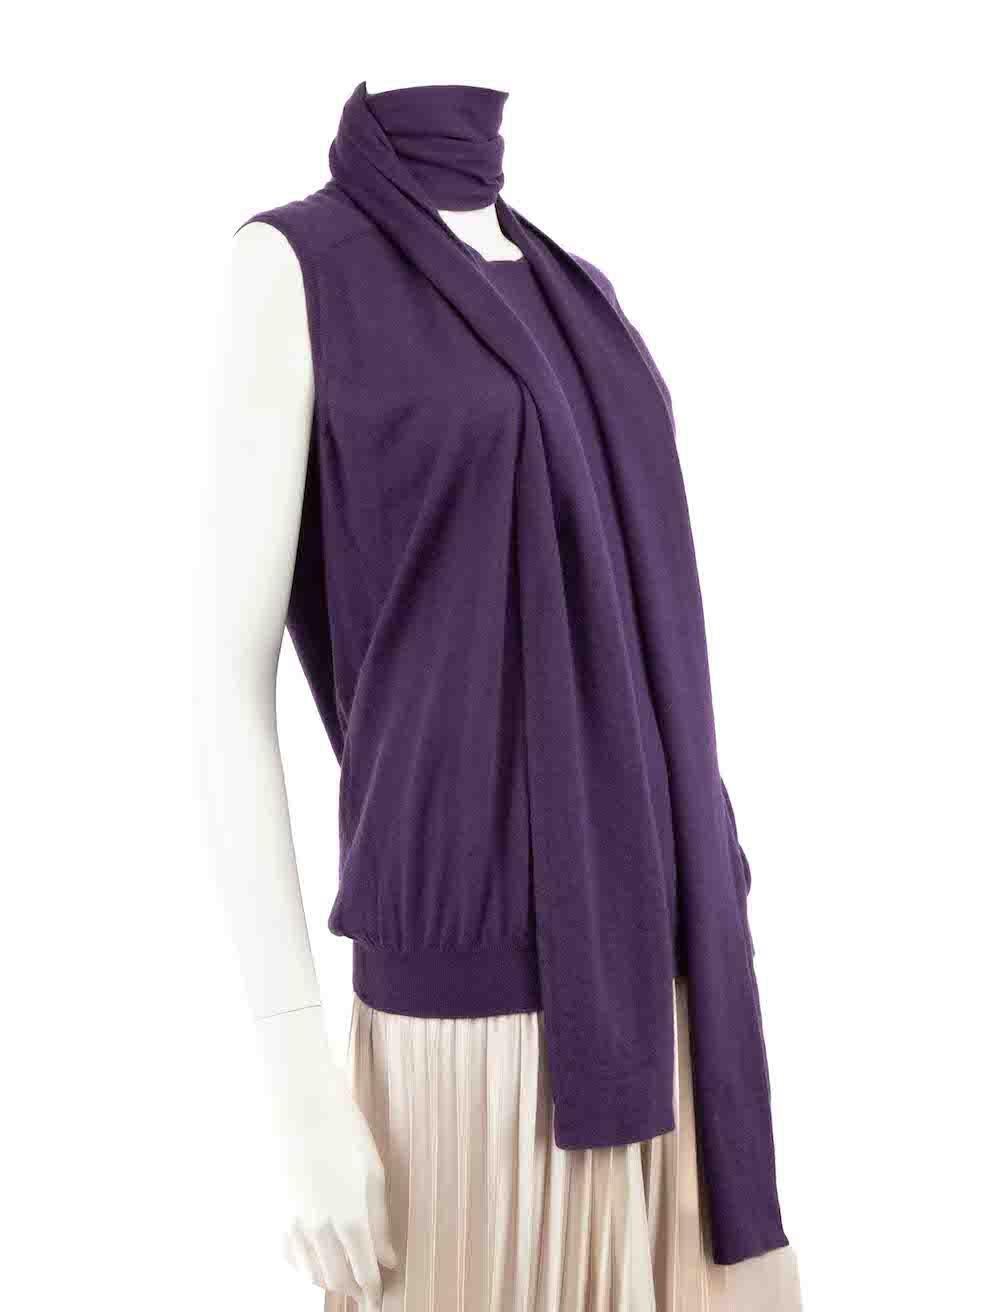 CONDITION is Very good. Hardly any visible wear to top is evident on this used Balenciaga designer resale item.
 
 Details
 Purple
 Cashmere
 Knit top
 Sleeveless
 Round neck
 Attached scarf
 
 
 Made in Italy
 
 Composition
 100% Cashmere
 
 Care